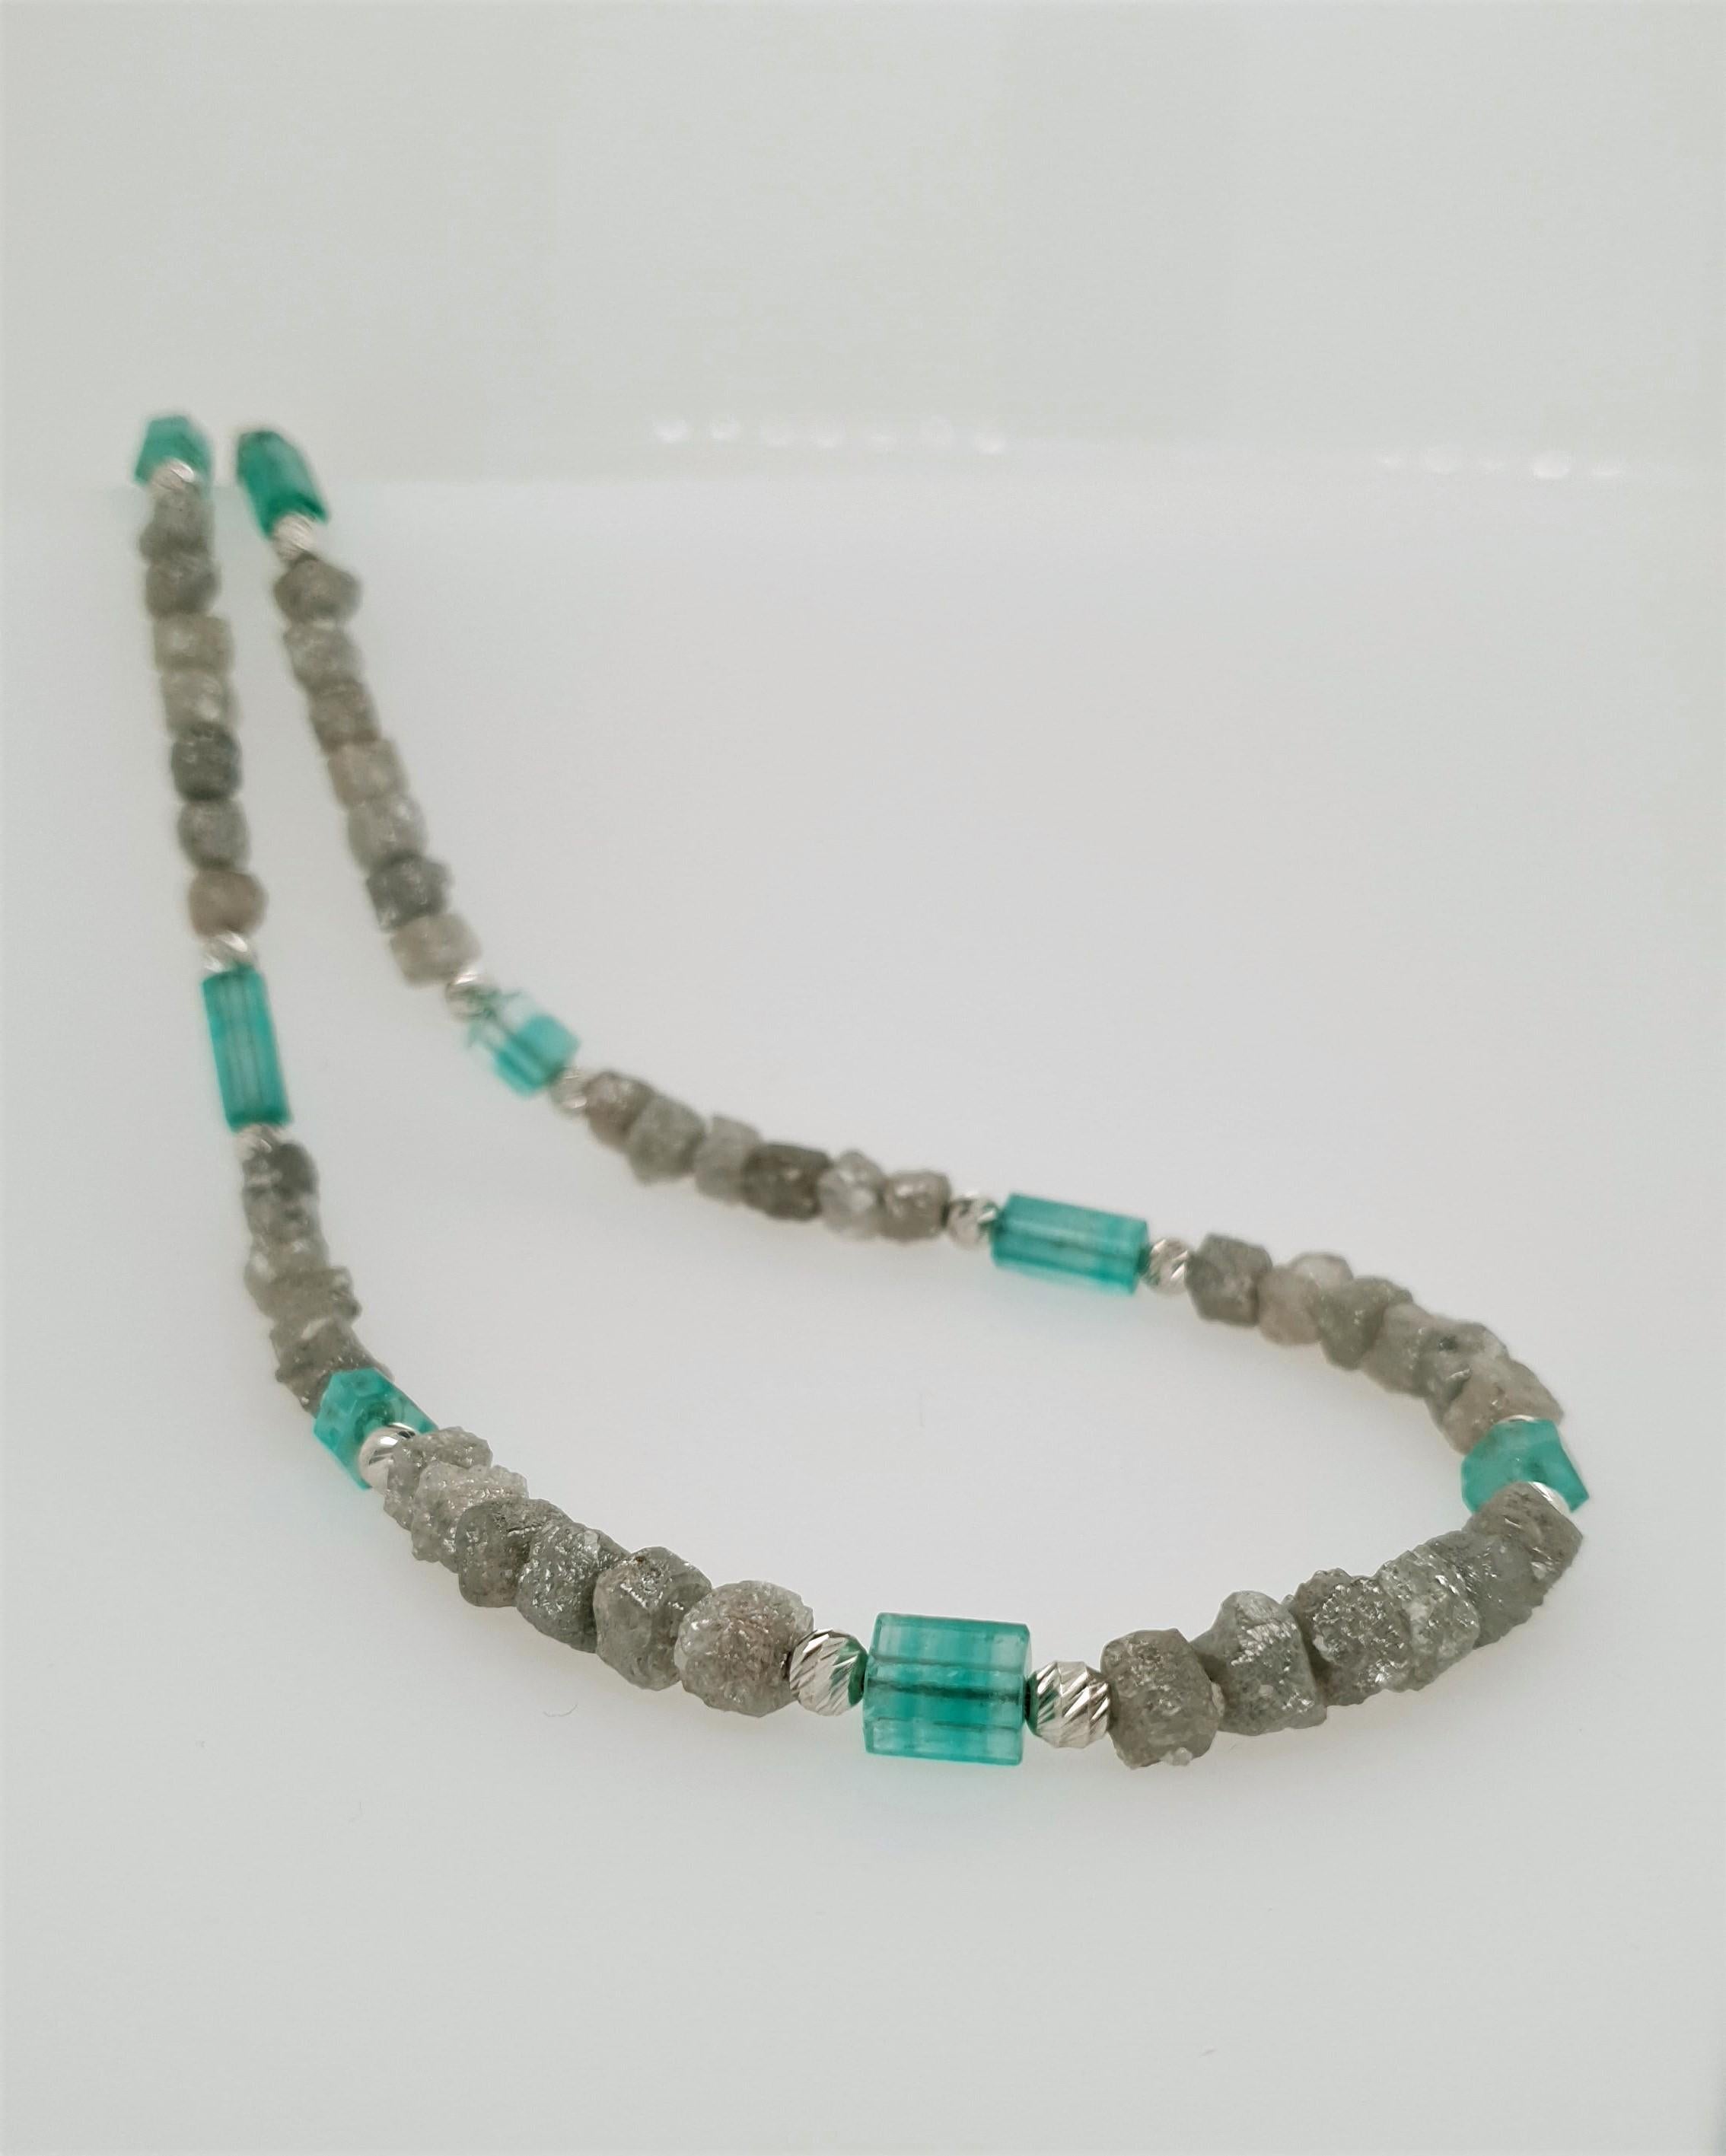 This exceptional natural Diamond and Emerald Crystal Necklace with 18 Carat White Gold is totally handmade.
Hexagonl 18kt white clasp and beads matchs perfectly to the natural crystal shape of the green Emerald.
Cutting as well as goldwork are made